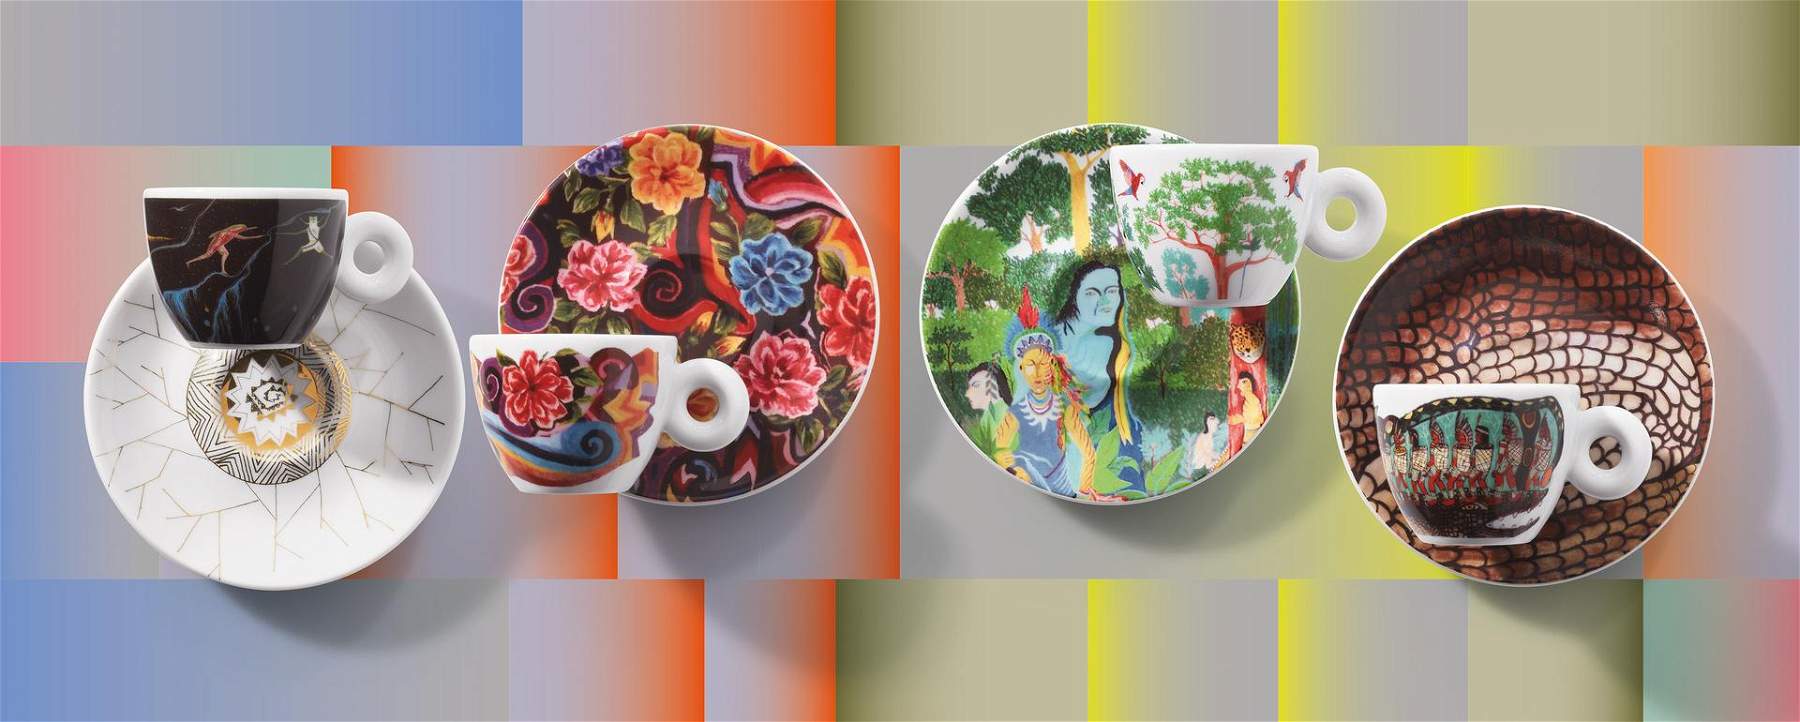 Illycaffè launches the new Illy Art Collection signed by 4 emerging Latin American artists.